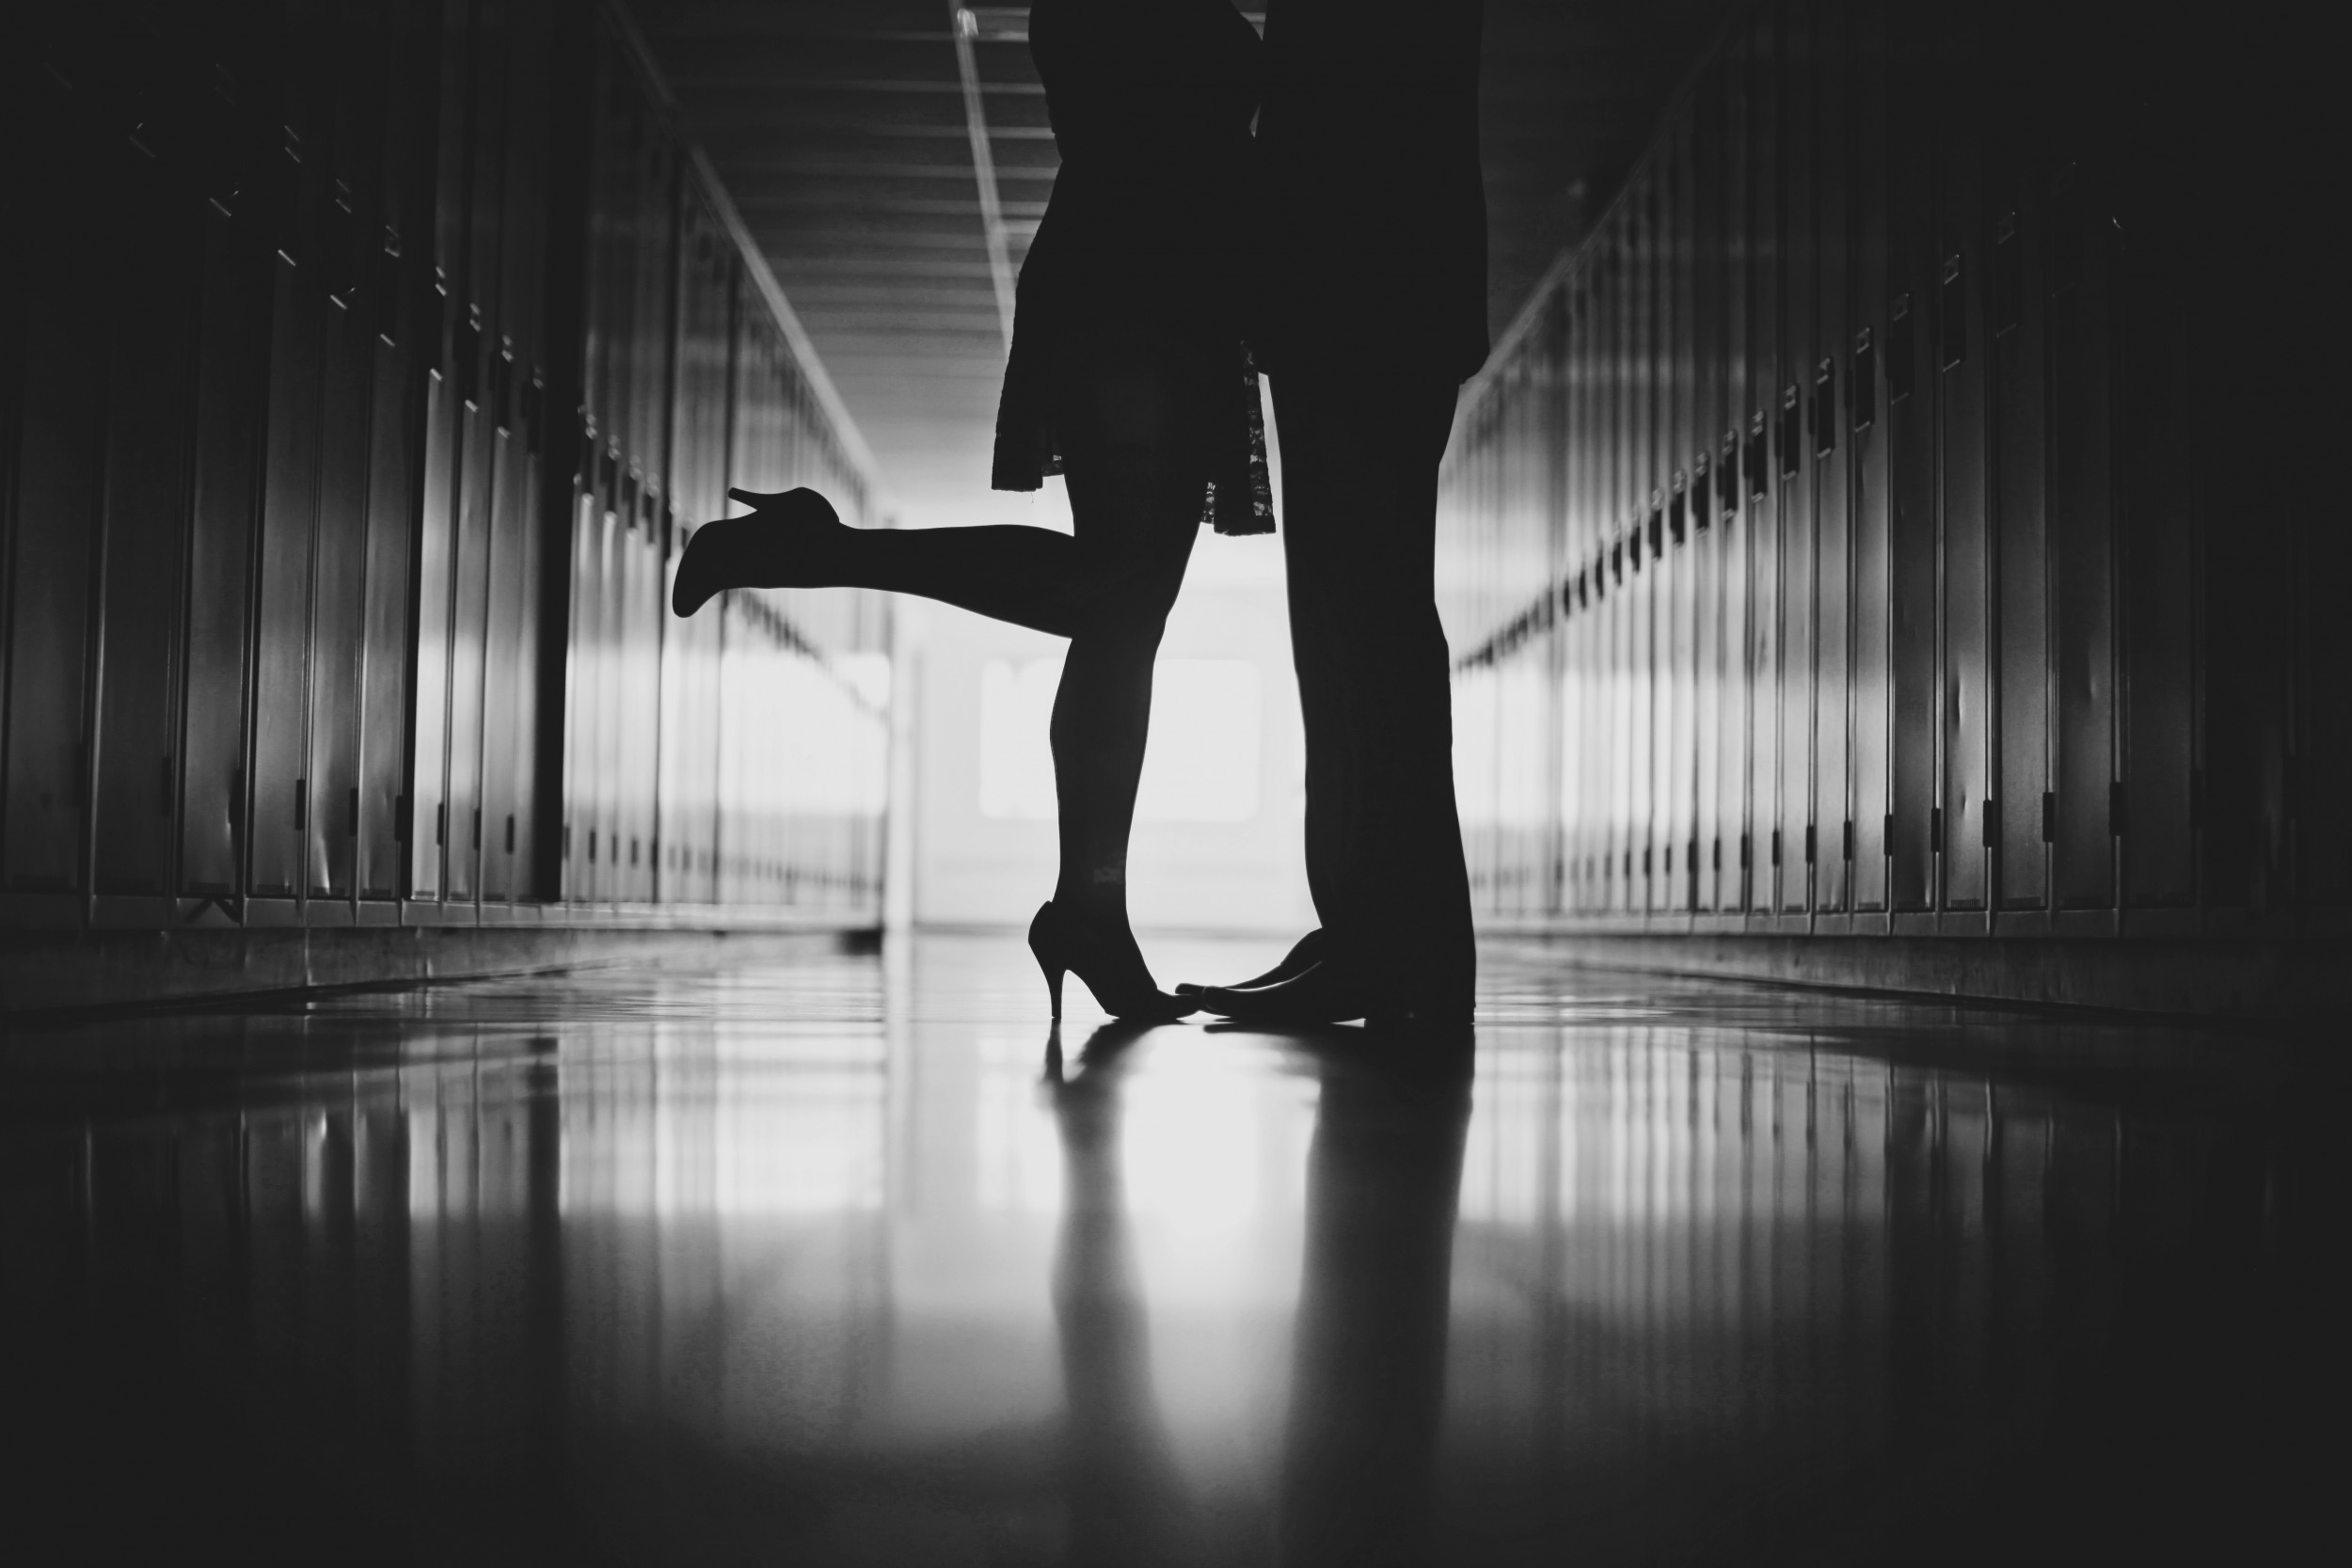 Schoolsex Tamil - Video Shows Students Having Sex in Maryland Classroom, School and Police  Investigate